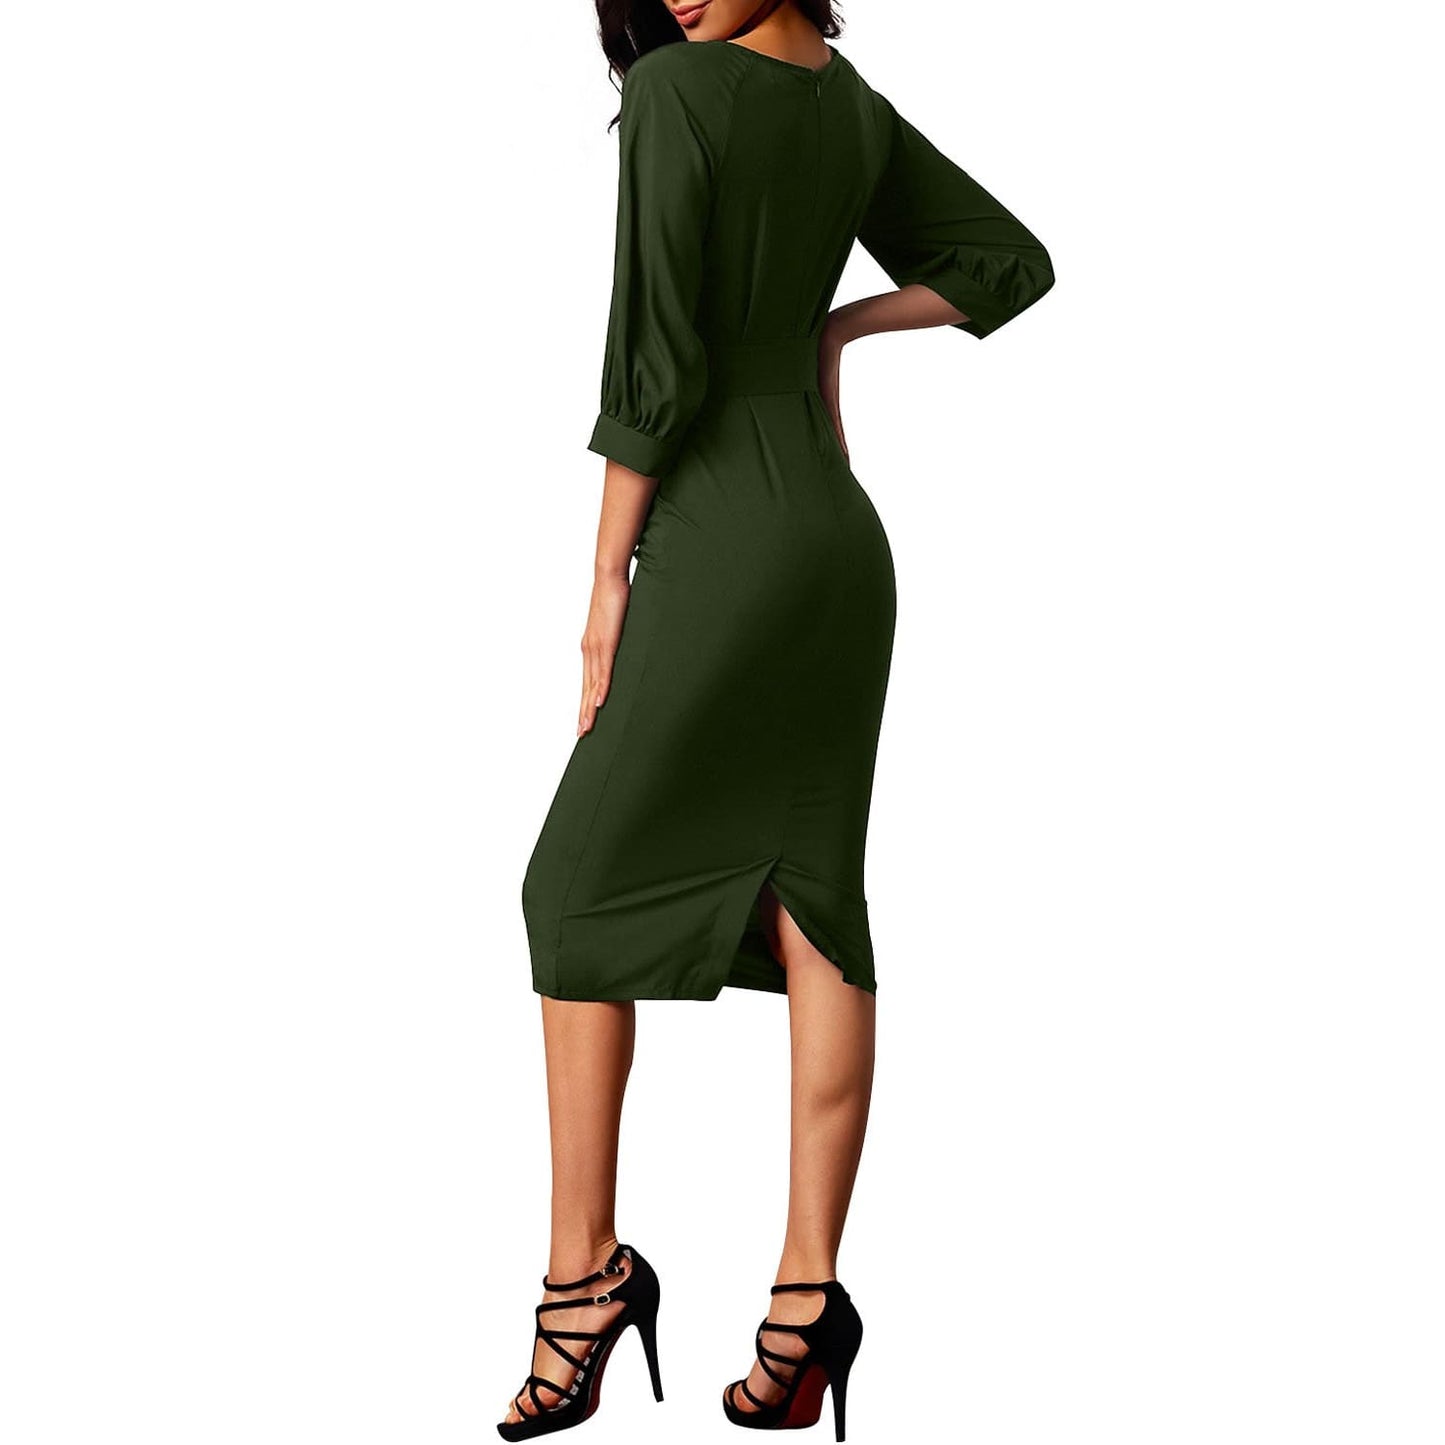 Puff Sleeve Pencil Dress - Army Green Size 10 - Best YOU by HTS